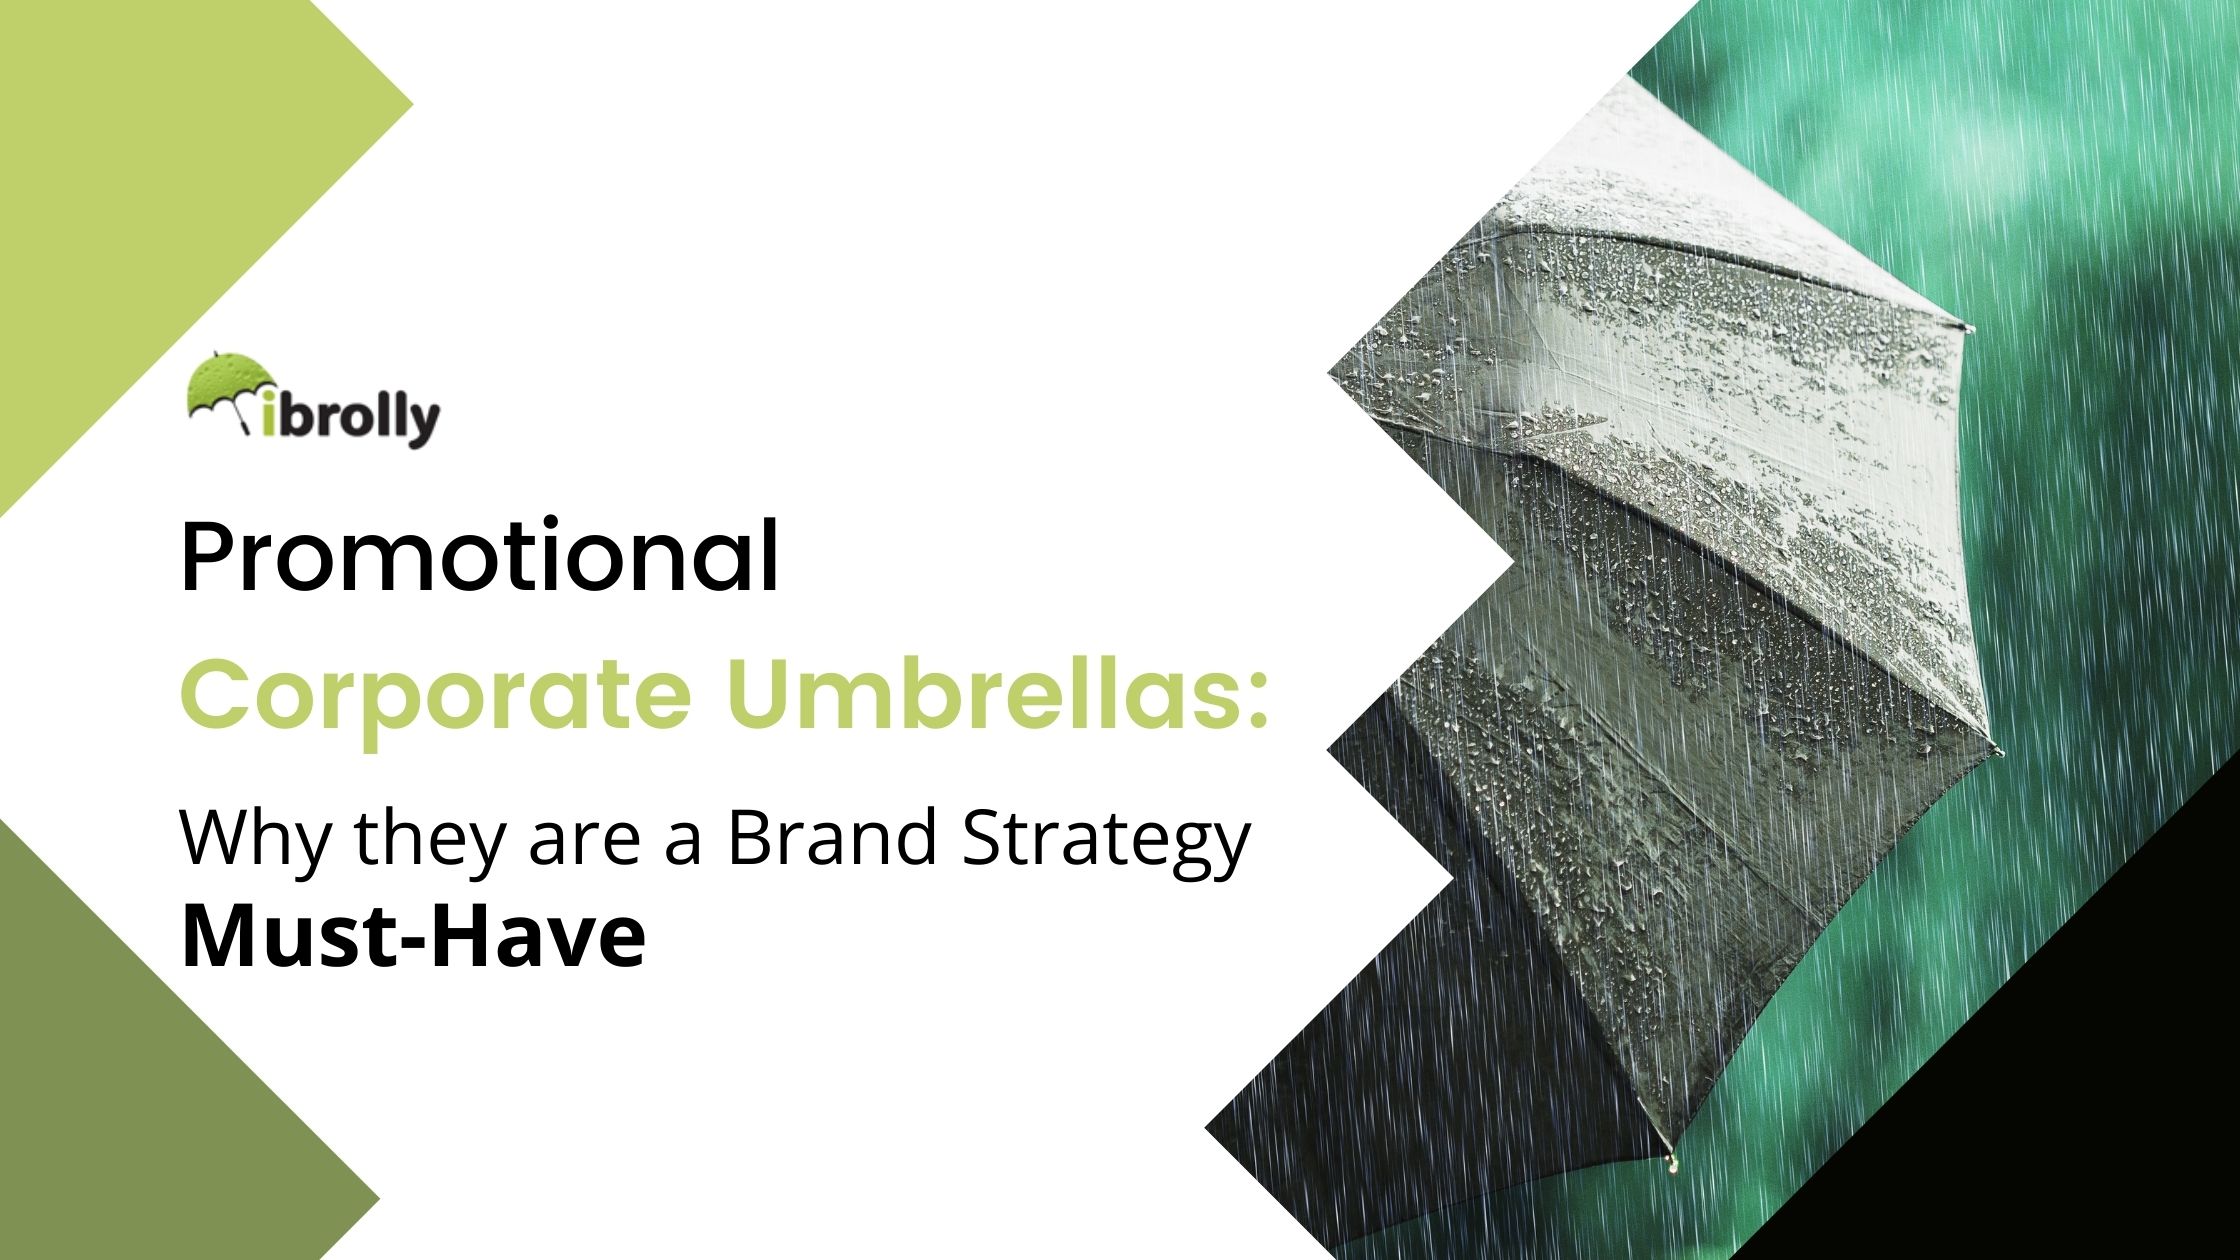 Umbrellas as Corporate giveaways: Which industries do they work best for?